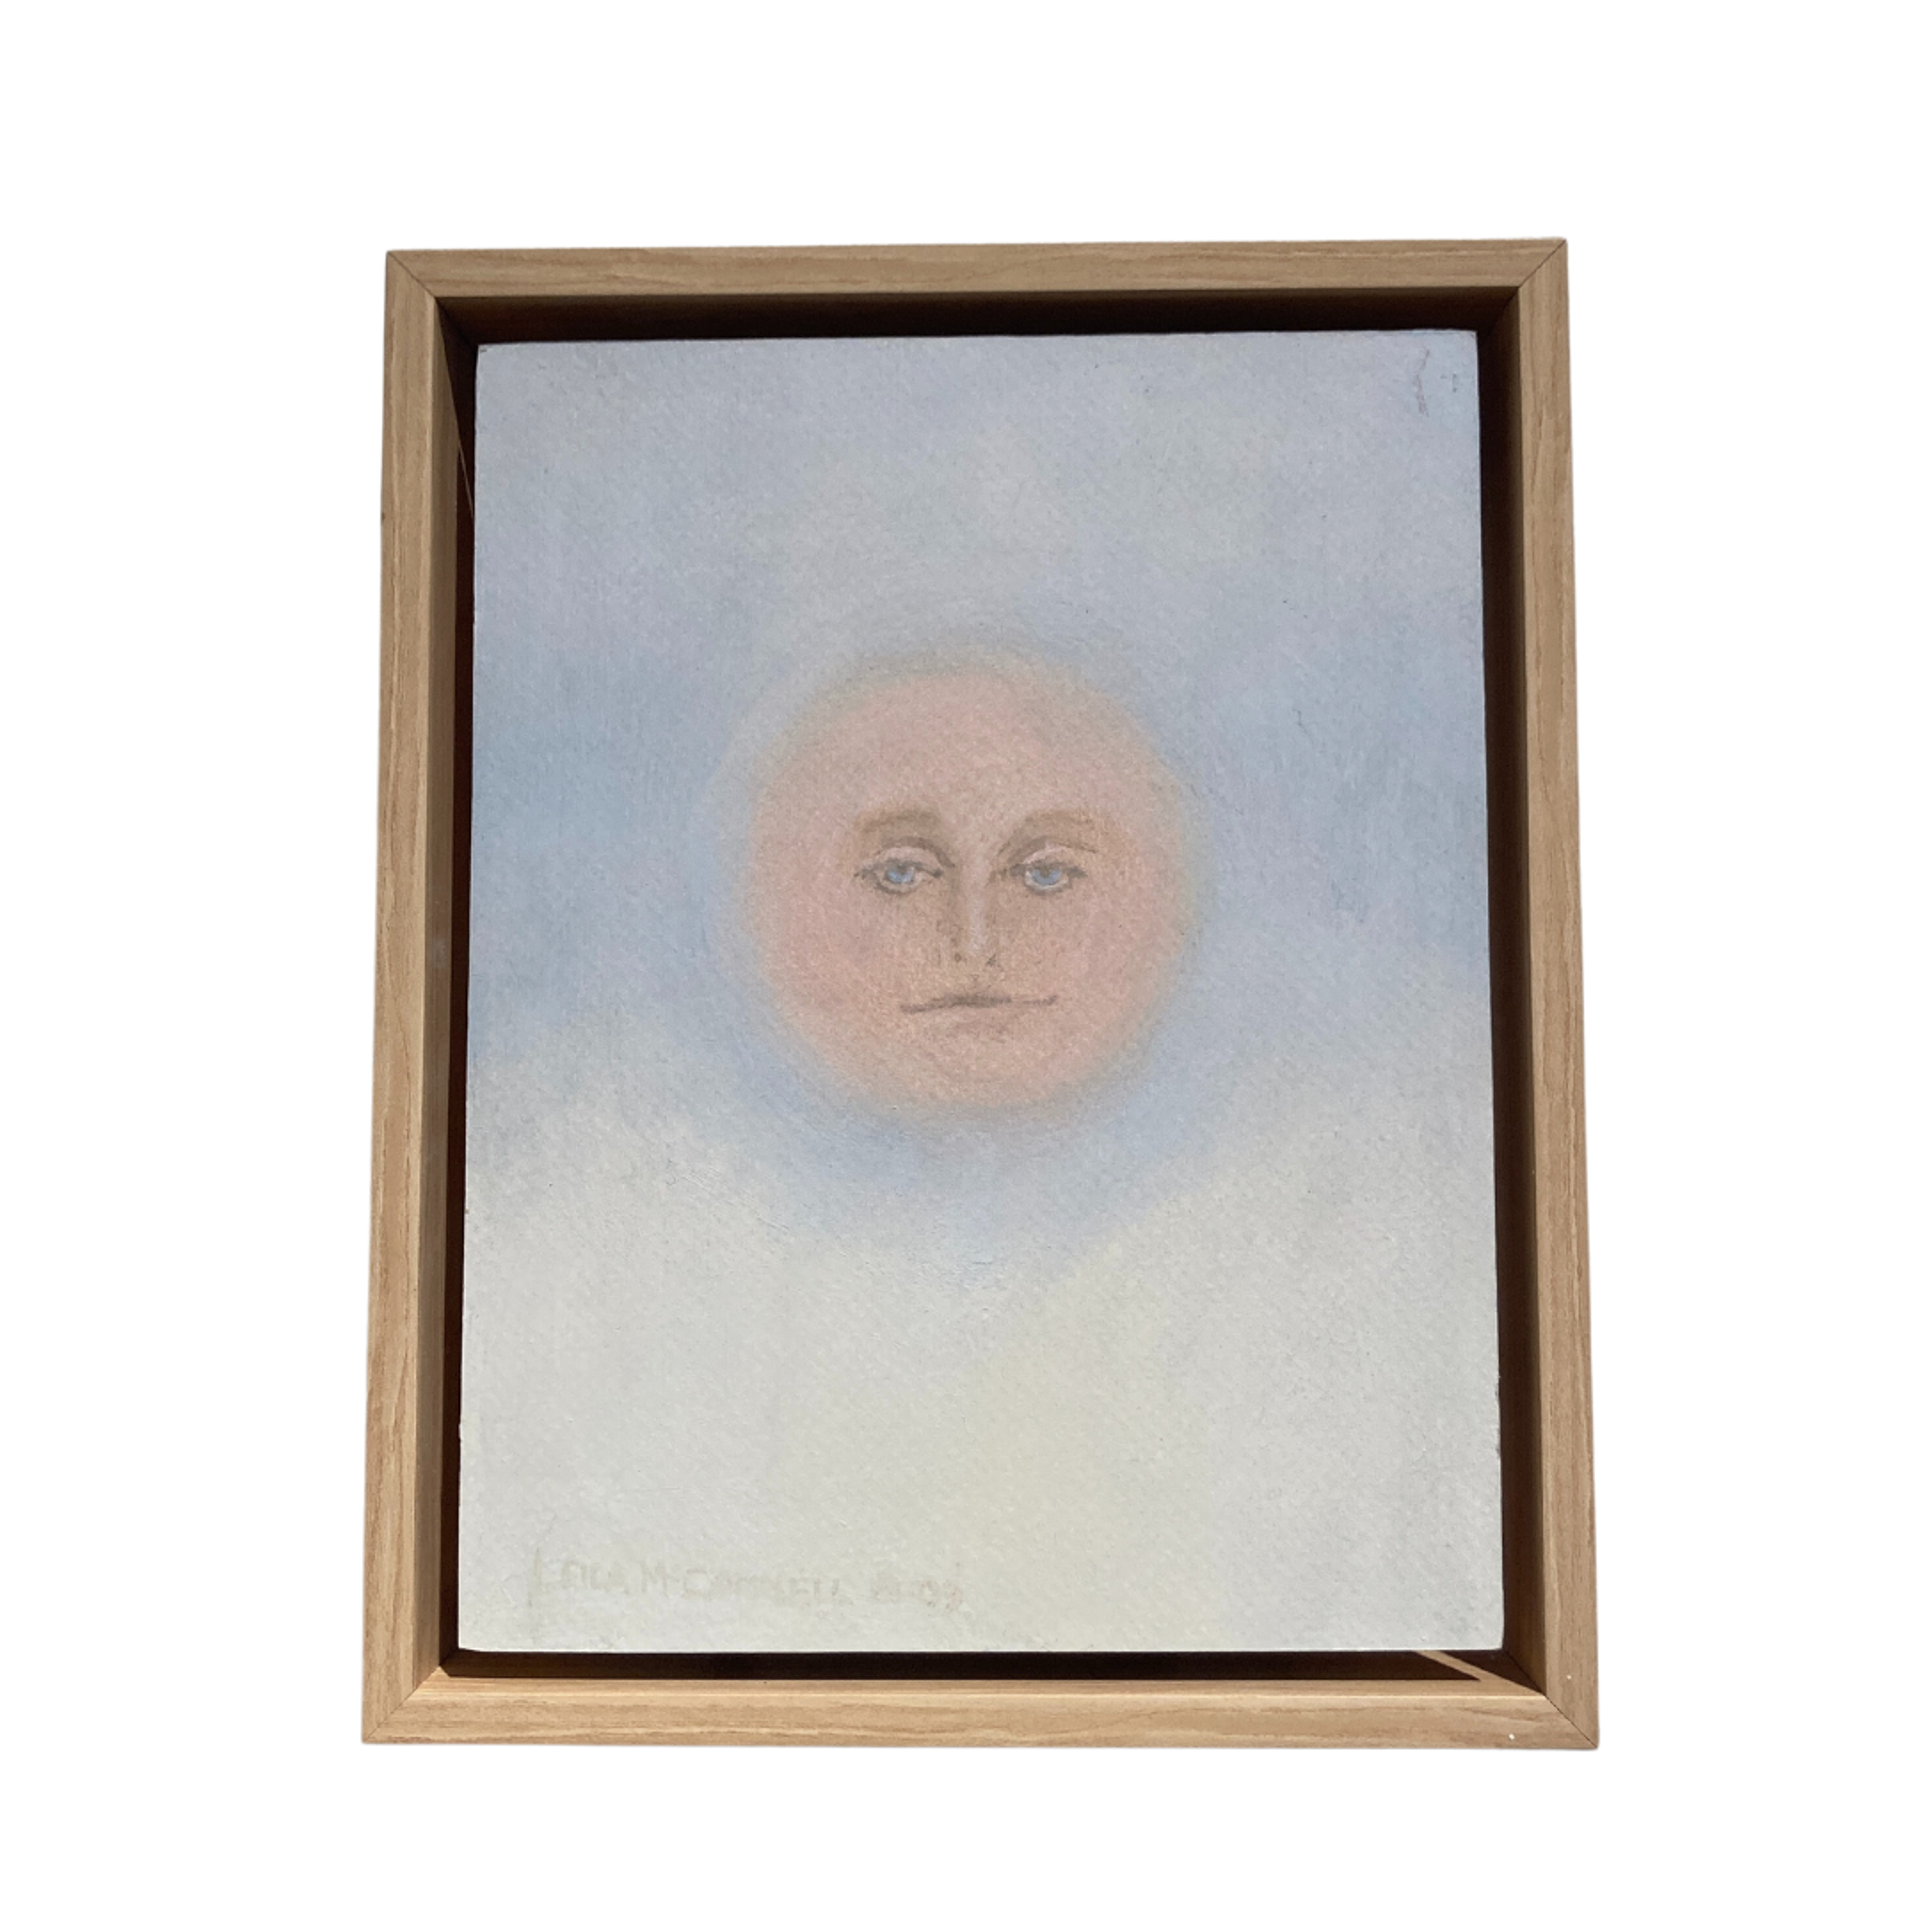 Moonface - peach on pale blue/white by Leila McConnell